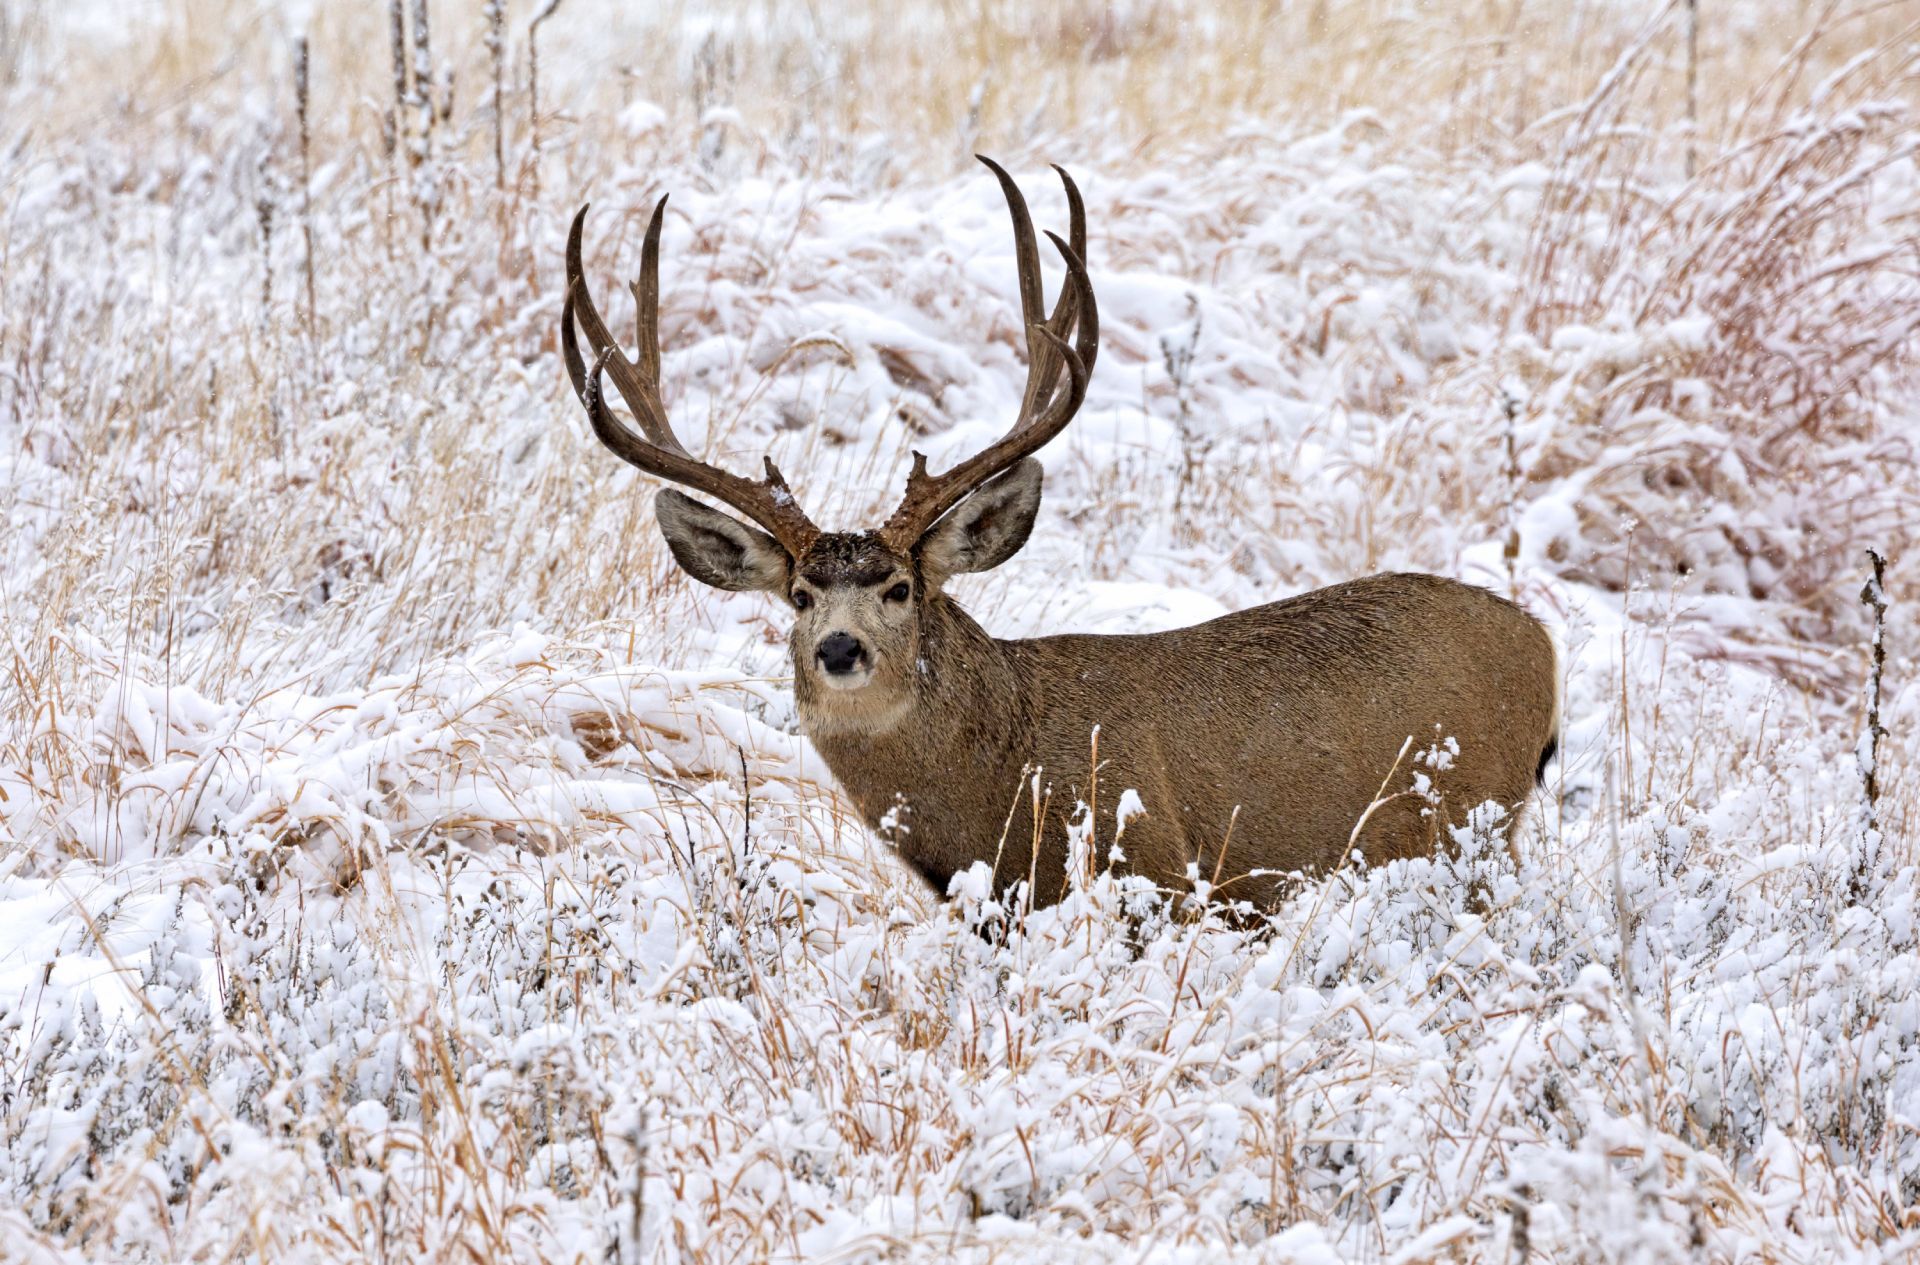 a deer with antlers is standing in a snowy field .